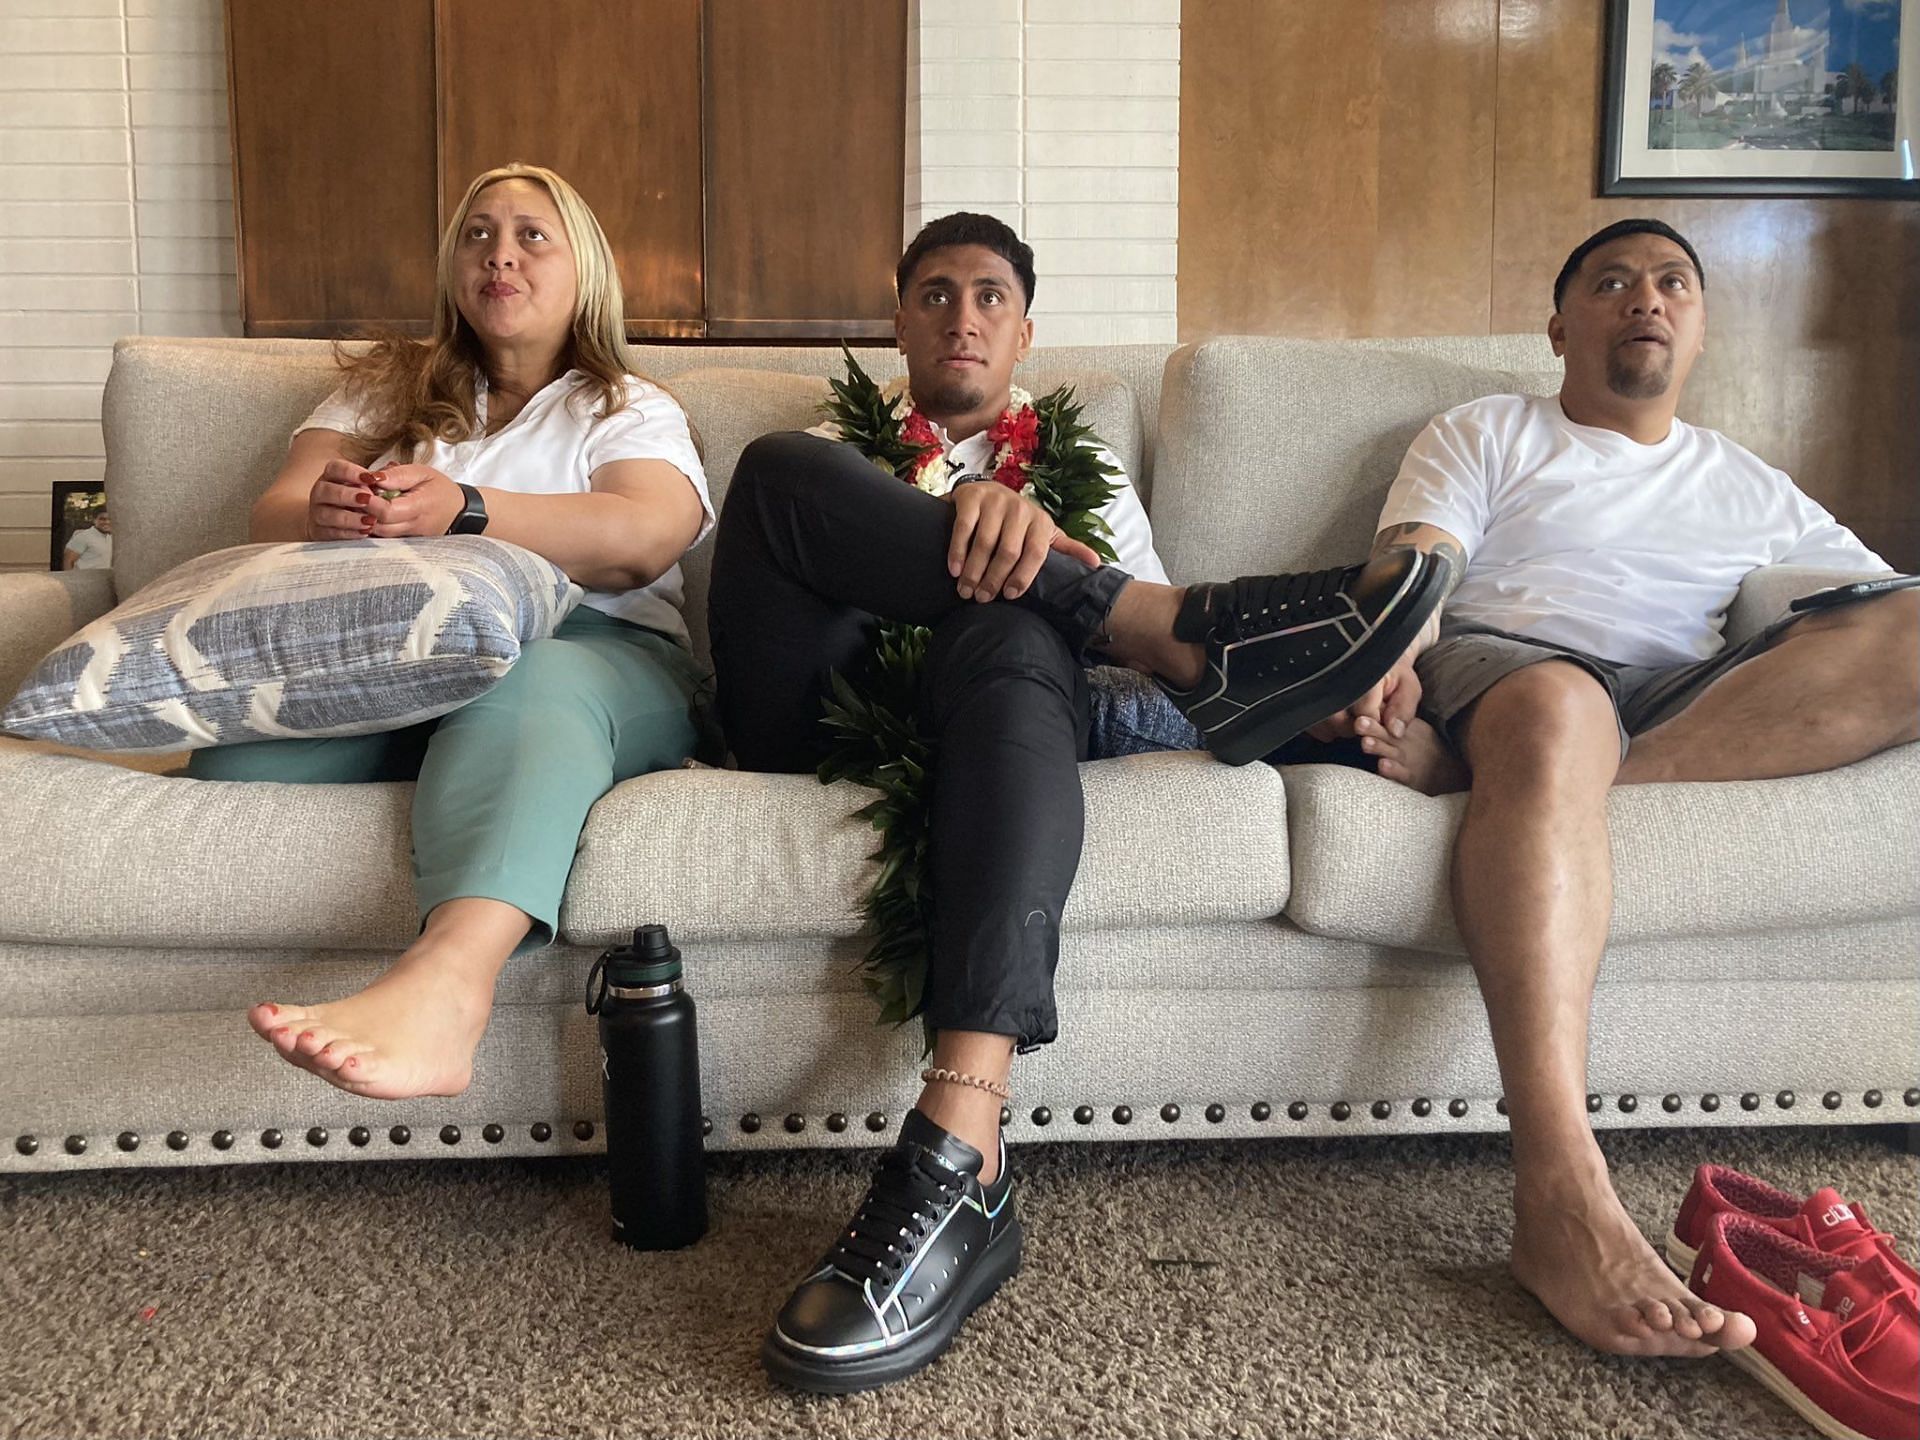 Henry To&rsquo;oTo&rsquo;o with his parents in California as he waits for the big call. Credit: Wesley Sinor (Twitter)